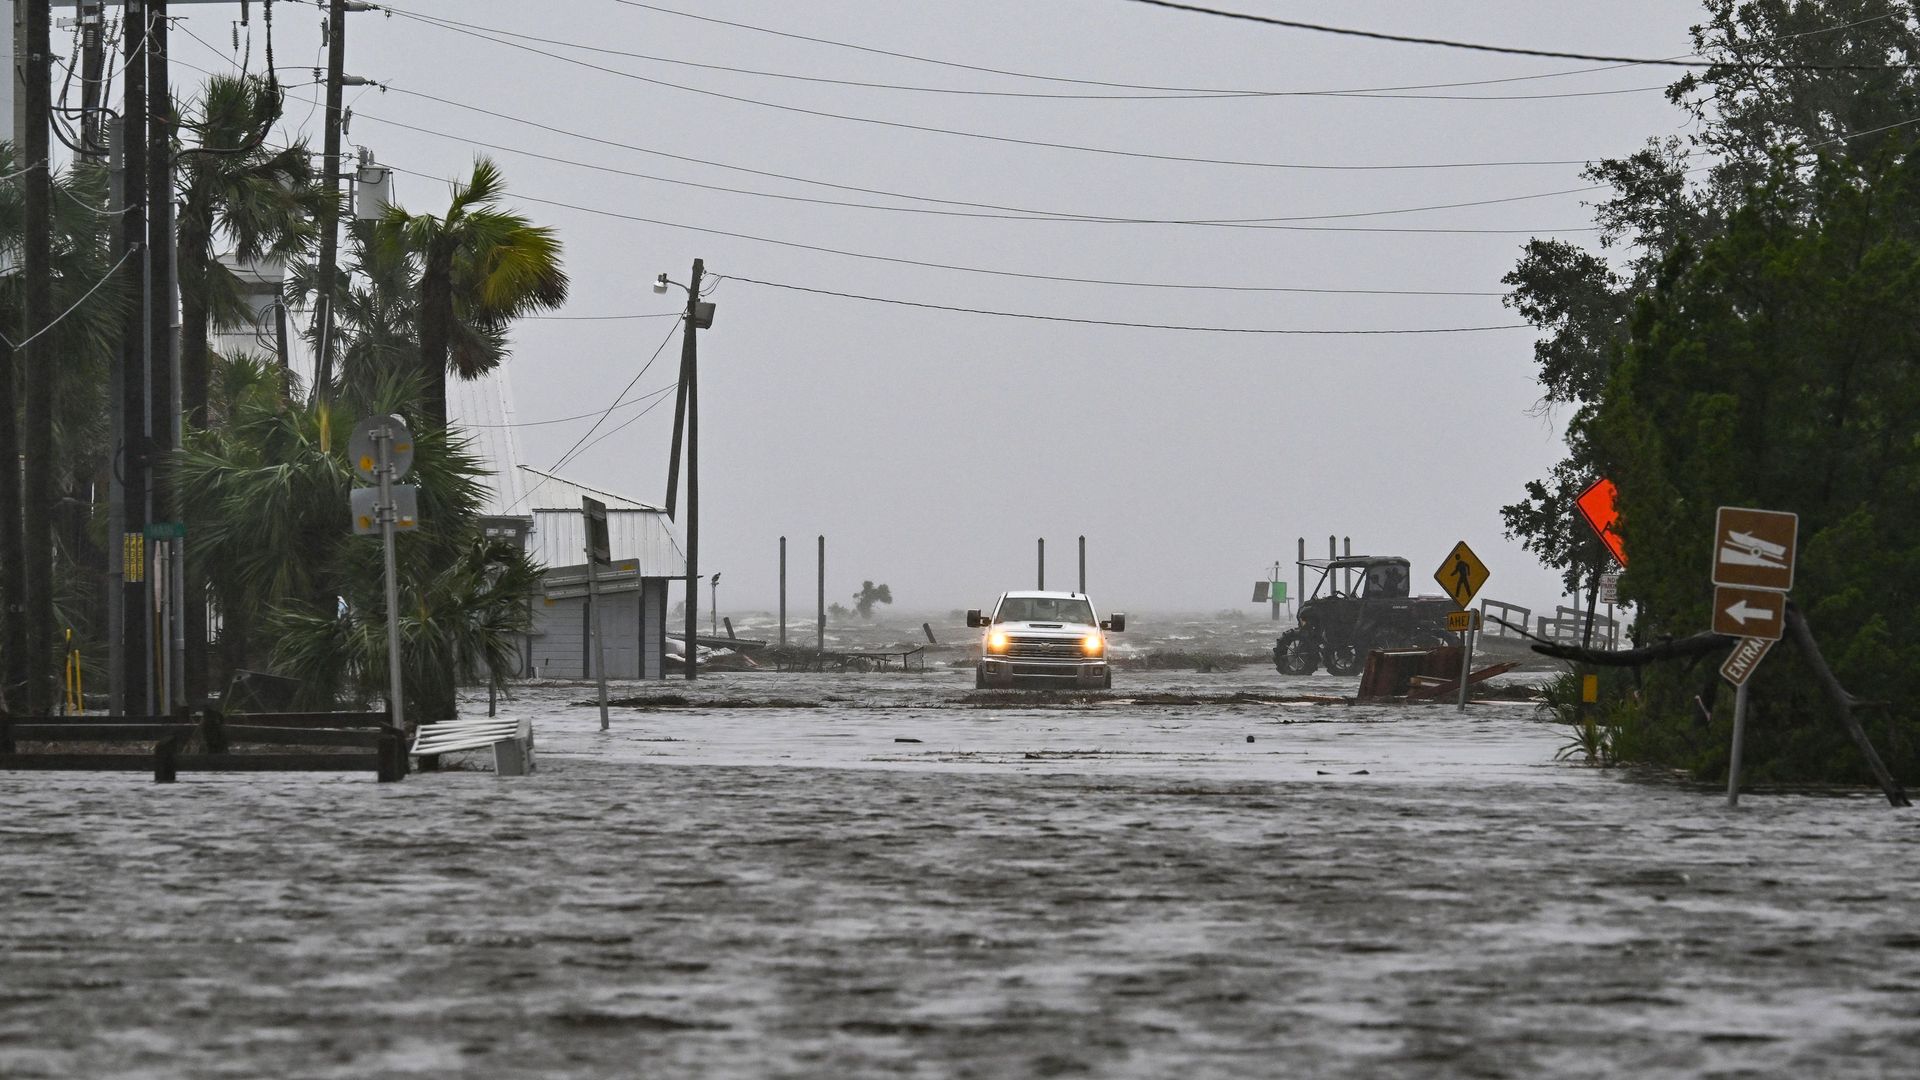 A truck driving on a flooded street during Hurricane Idalia in Florida.